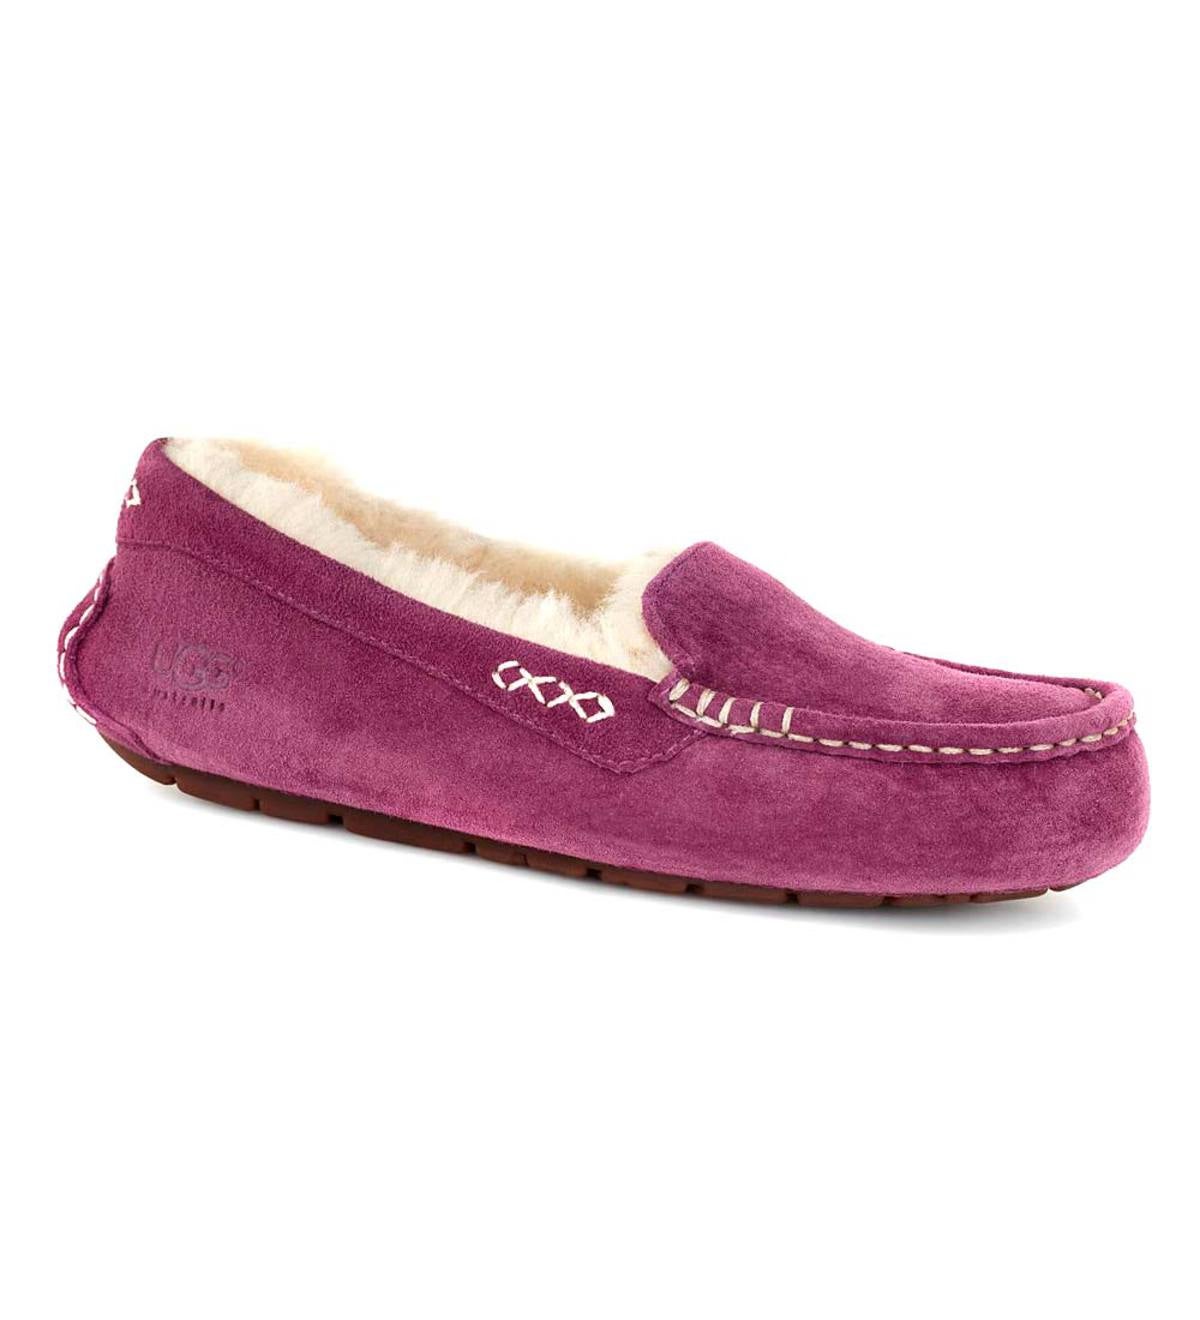 ugg ansley slippers bougainvillea